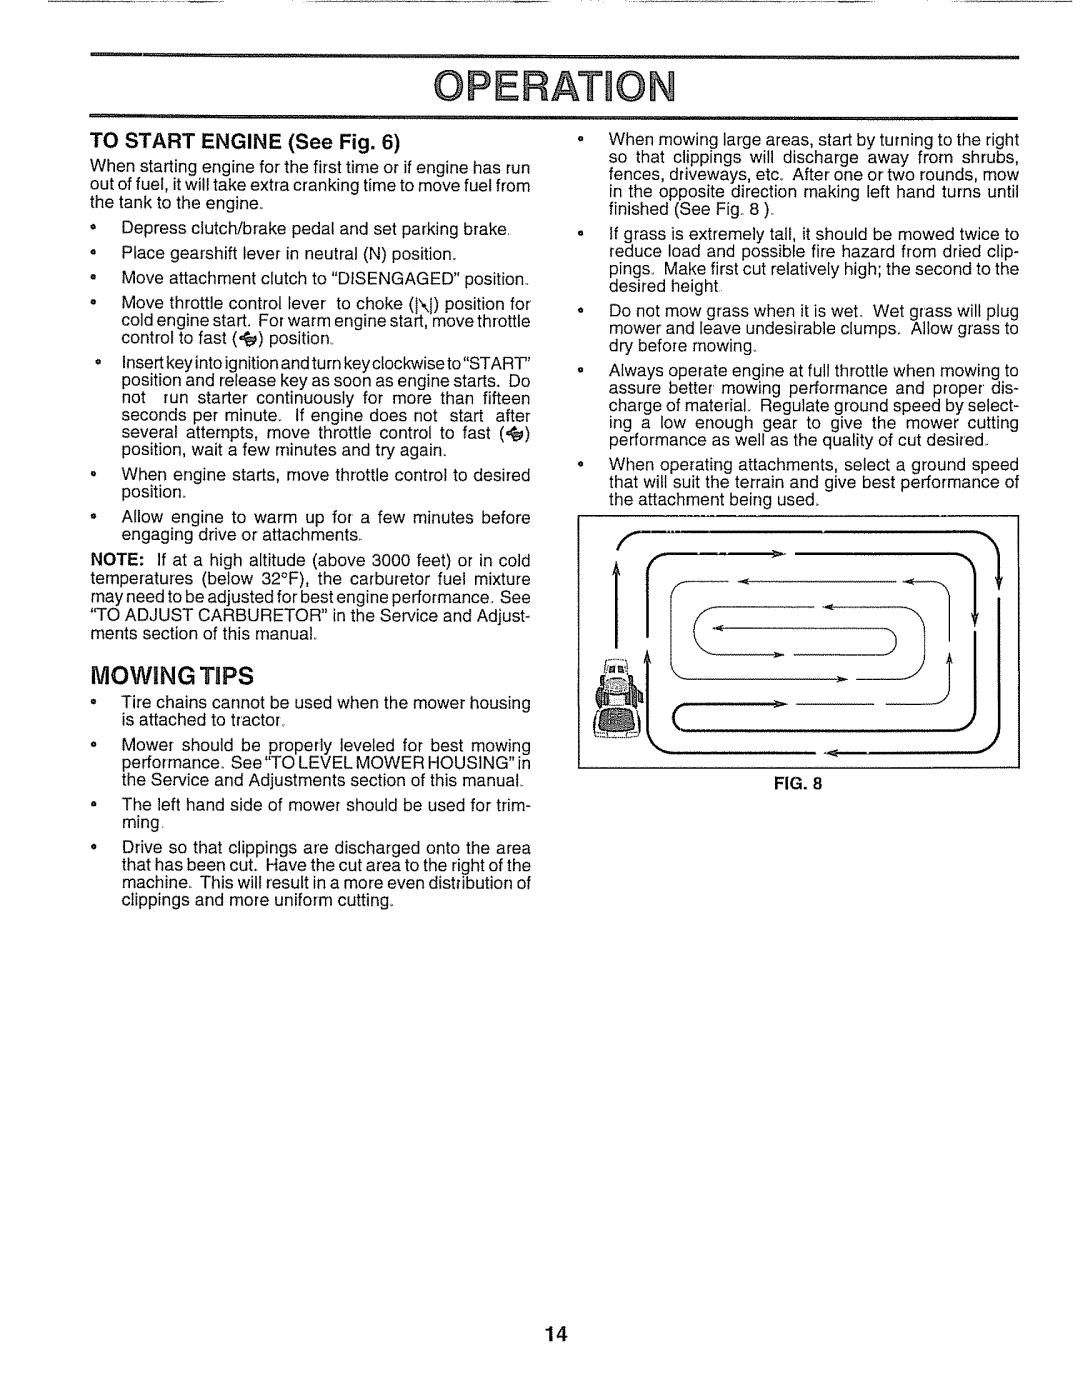 Craftsman 917.25651 owner manual Operation, MOWING TiPS, Fig 